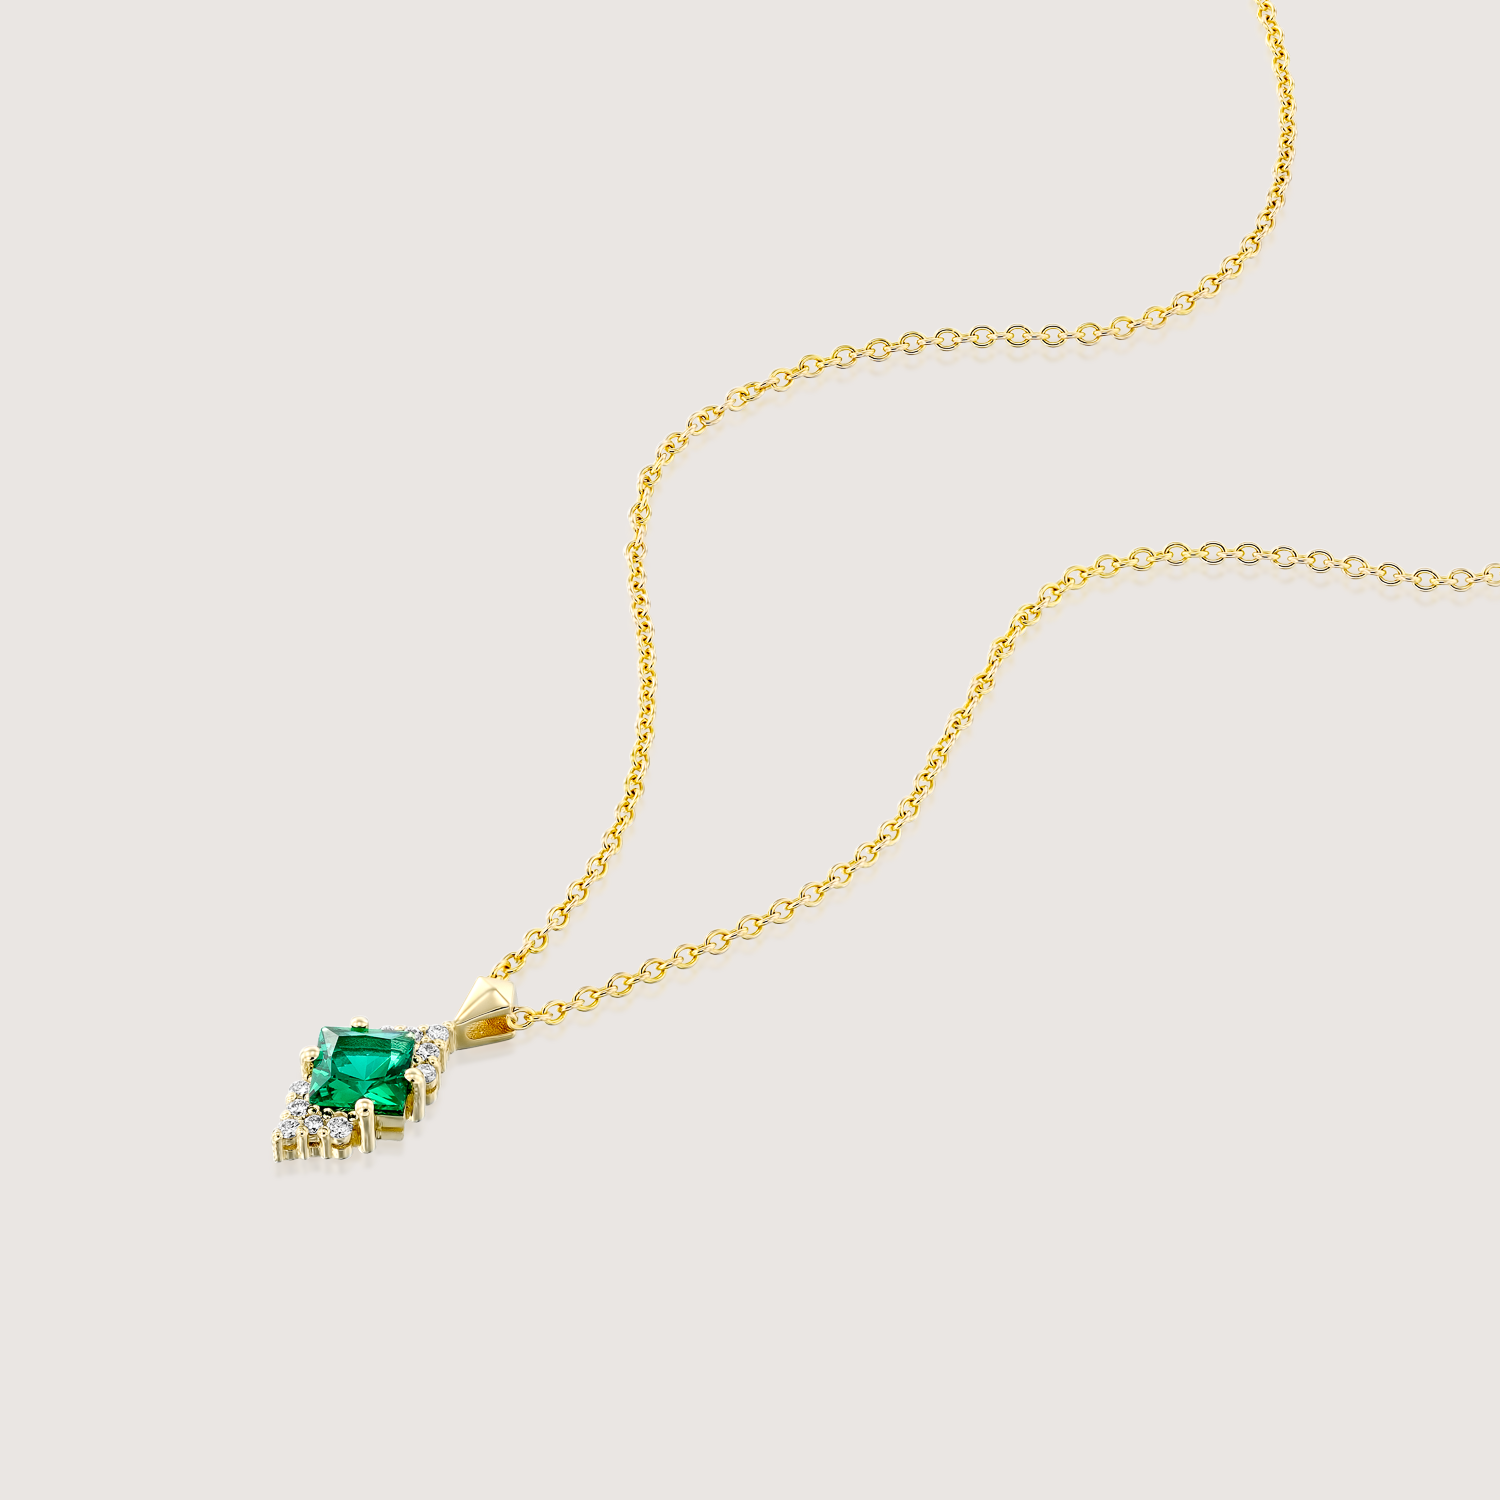 Juliette Necklace With Diamonds and Emerald